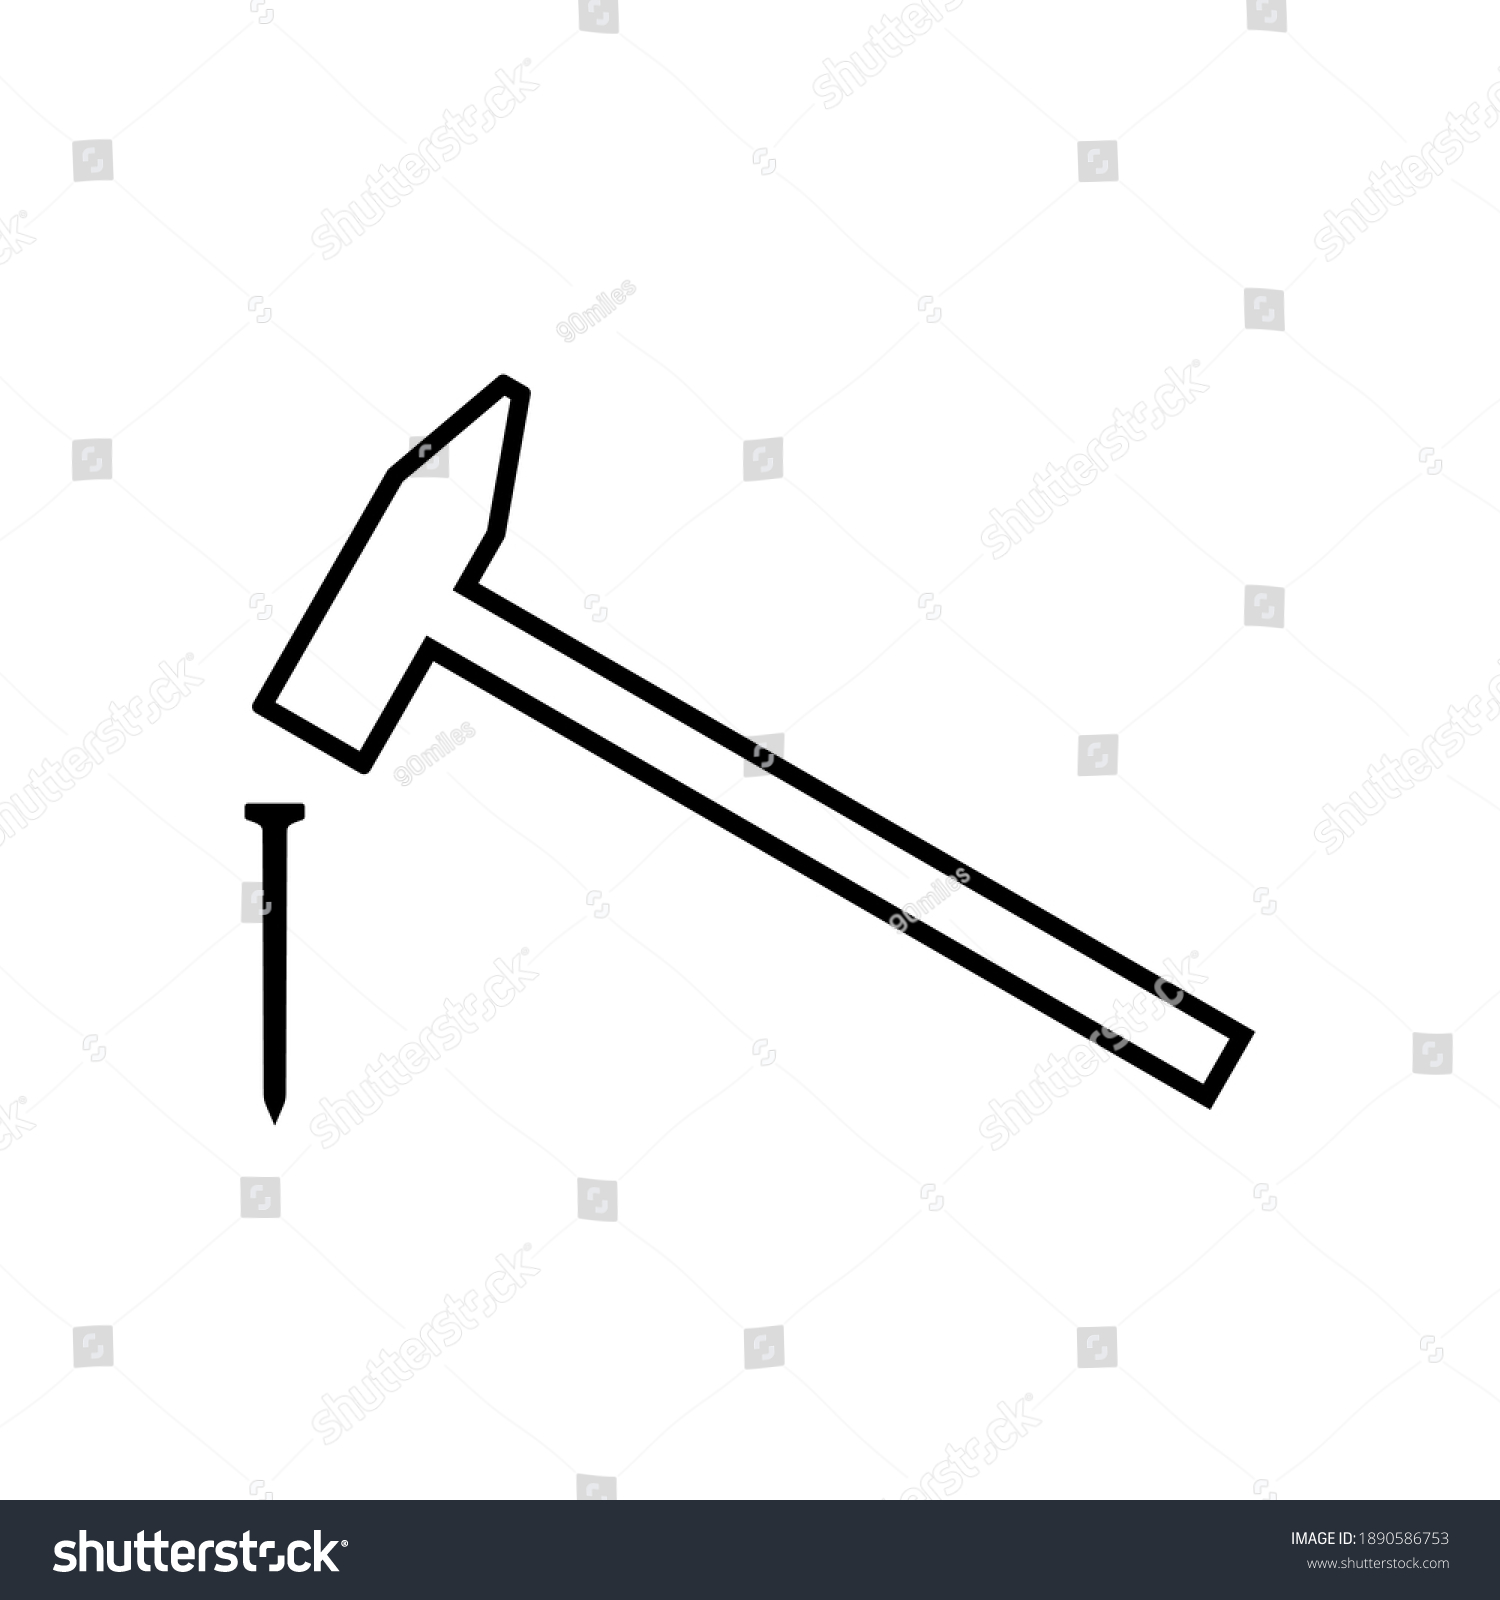 SVG of Hammer hitting nail line icon. Simple hammer with weighted metal head. Vector Illustration svg